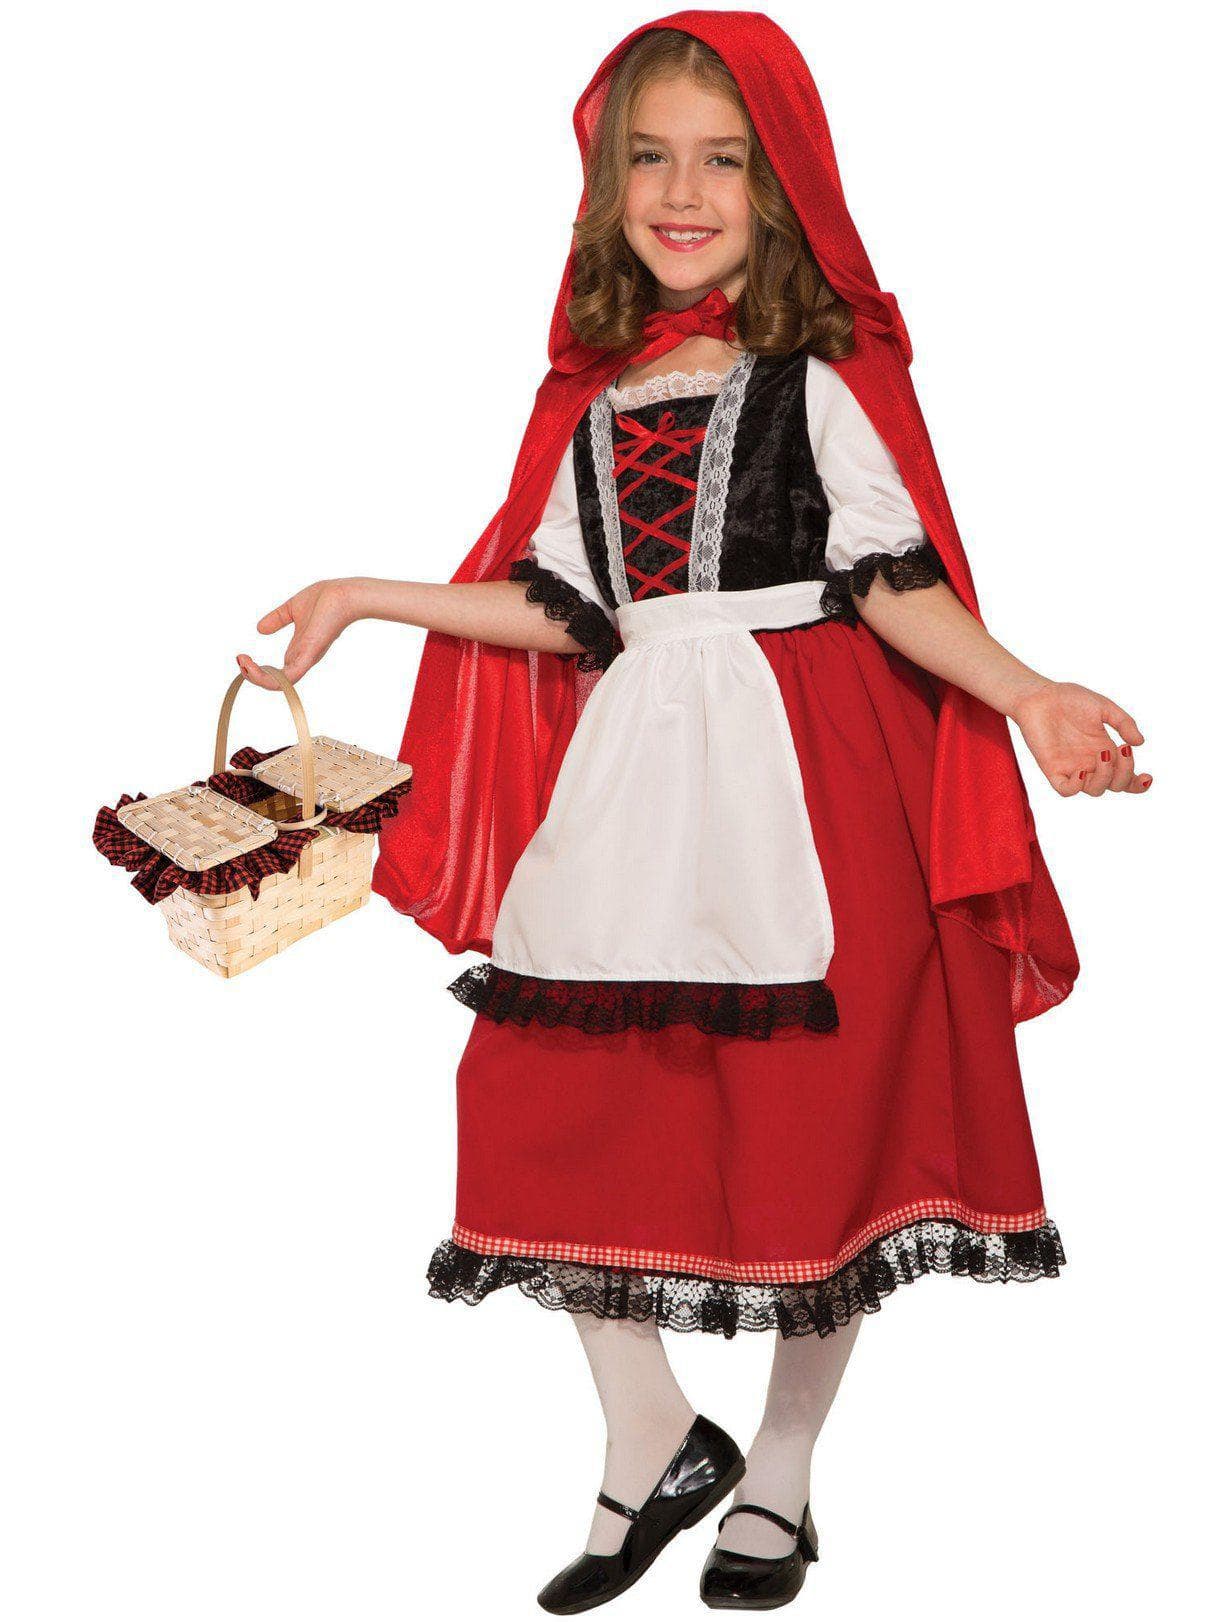 Kid's Deluxe Red Riding Hood Costume - costumes.com